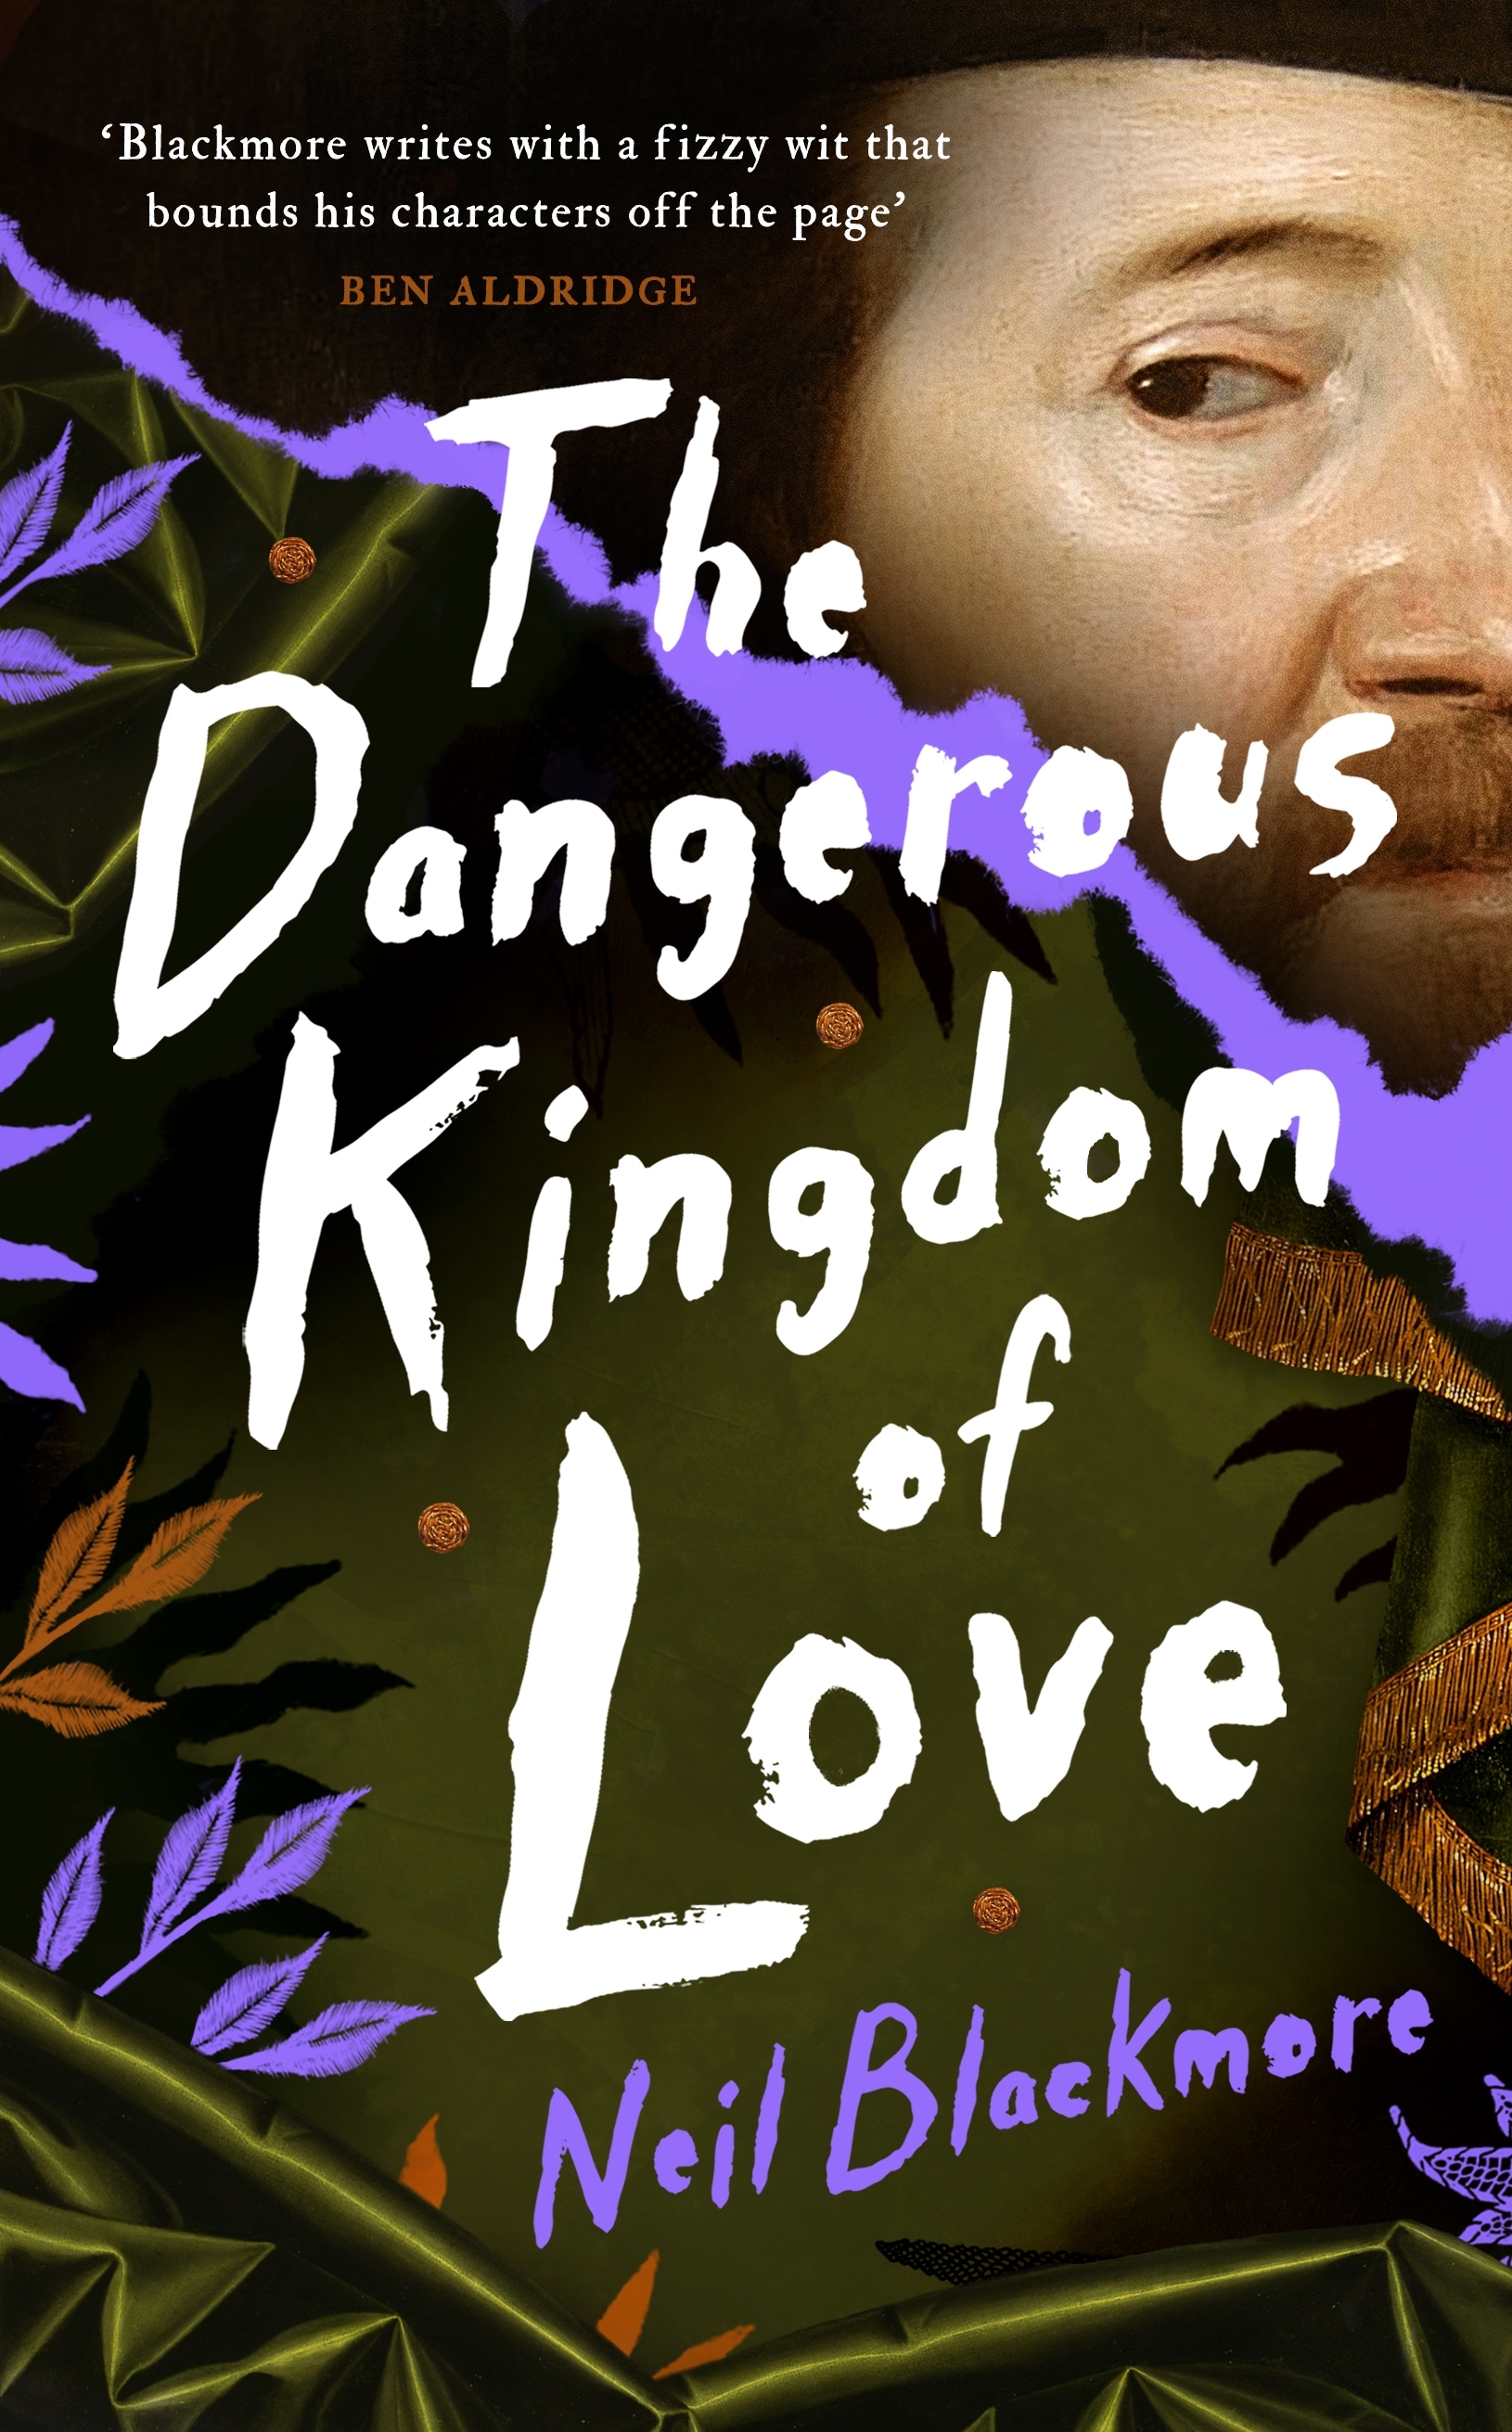 Book “The Dangerous Kingdom of Love” by Neil Blackmore — July 15, 2021